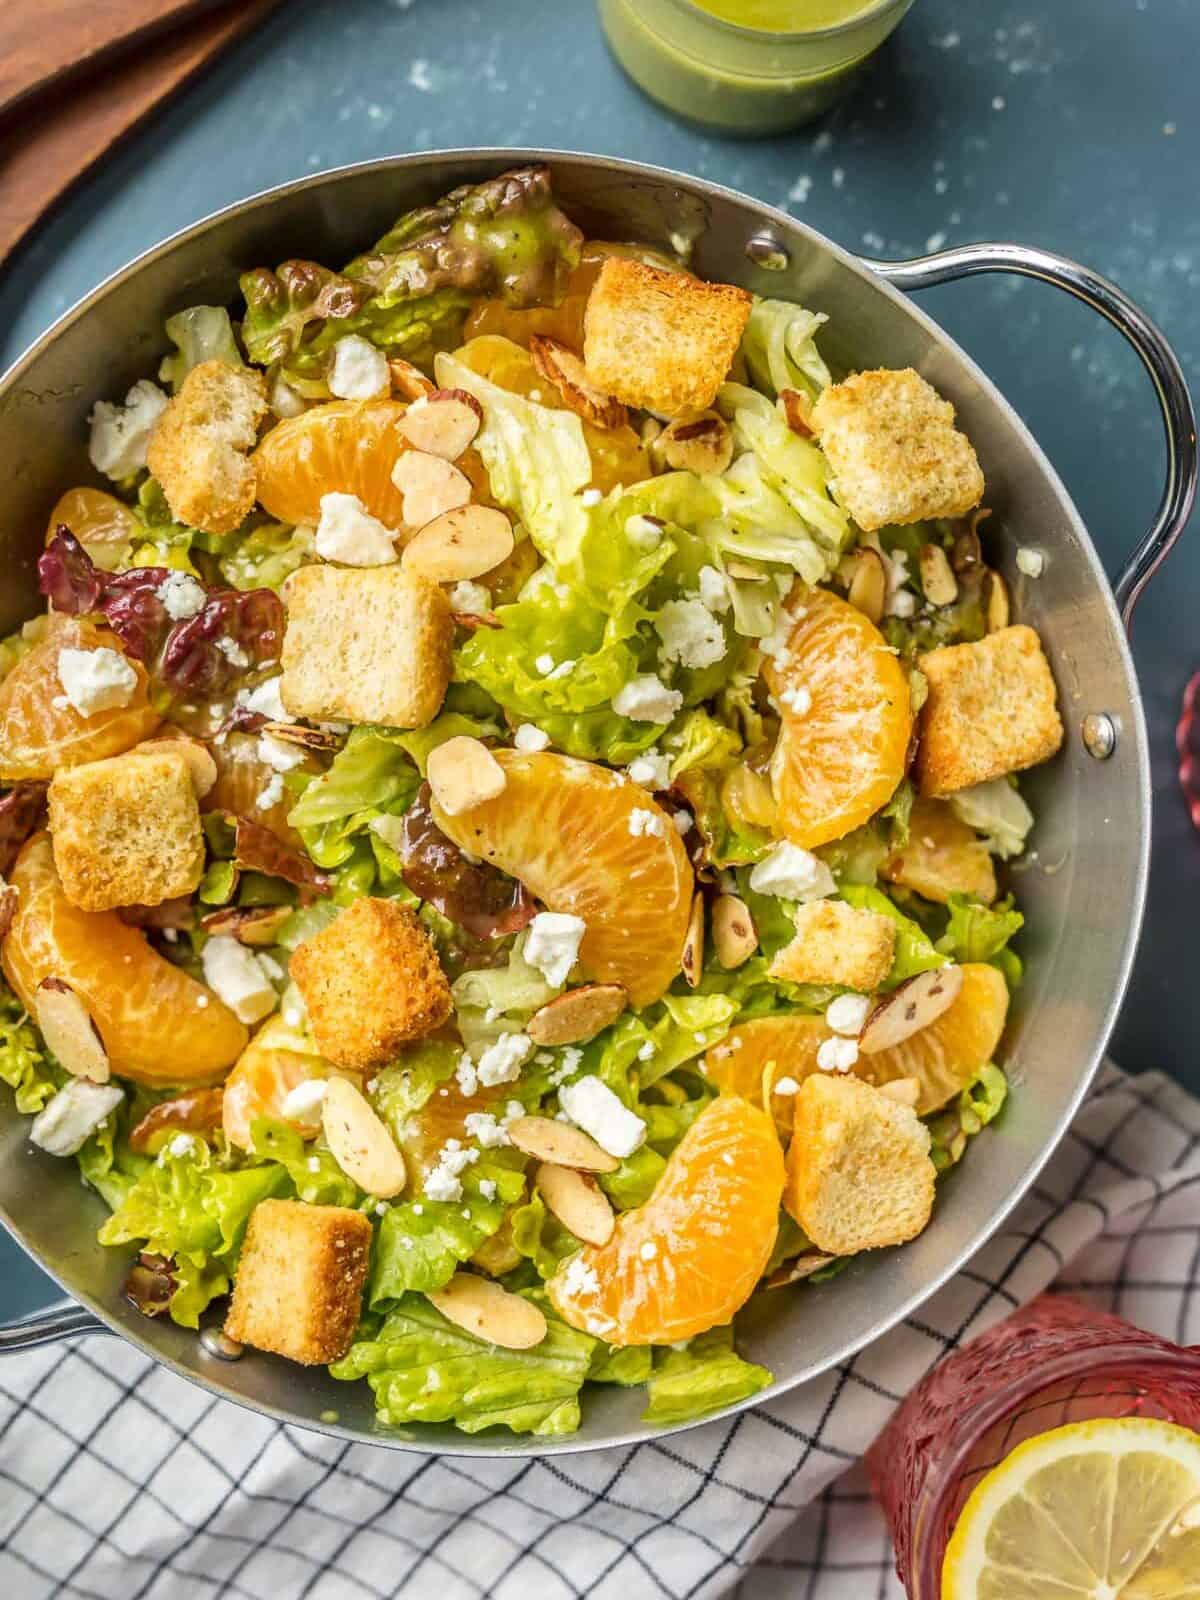 MANDARIN ORANGE SALAD topped with croutons, almonds, feta, and more